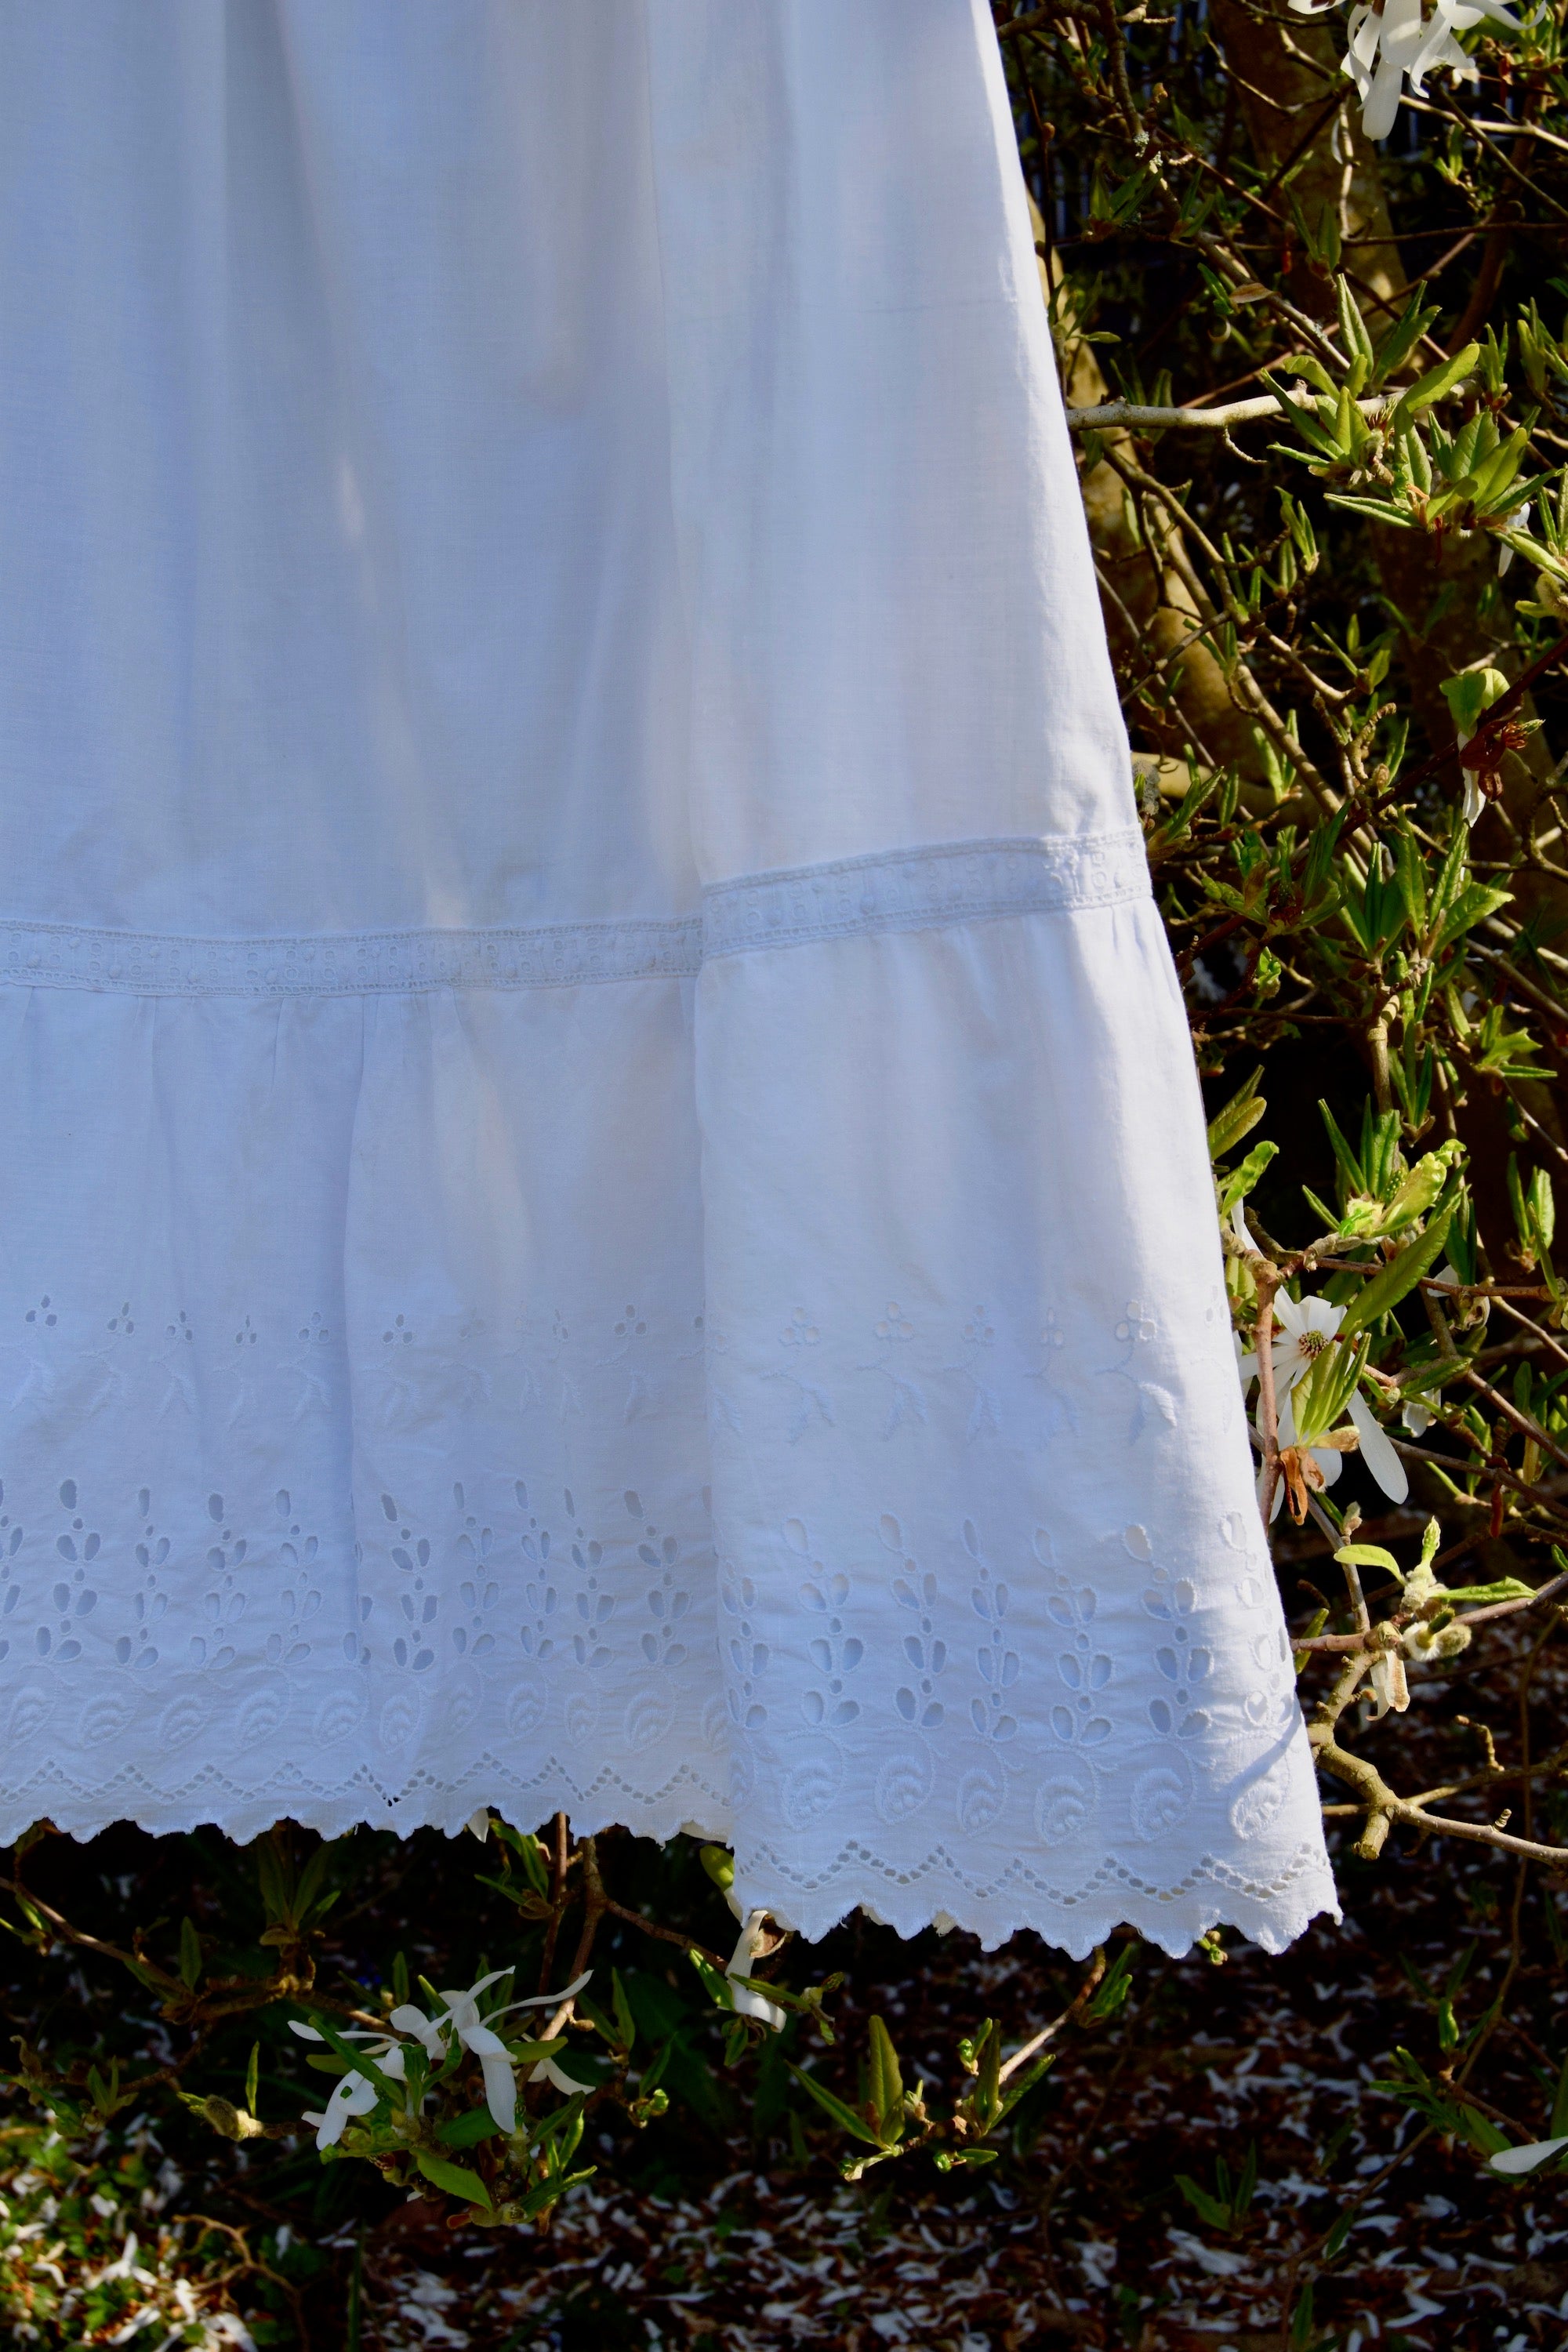 Antique White Cotton Crochet And Eyelet Dress